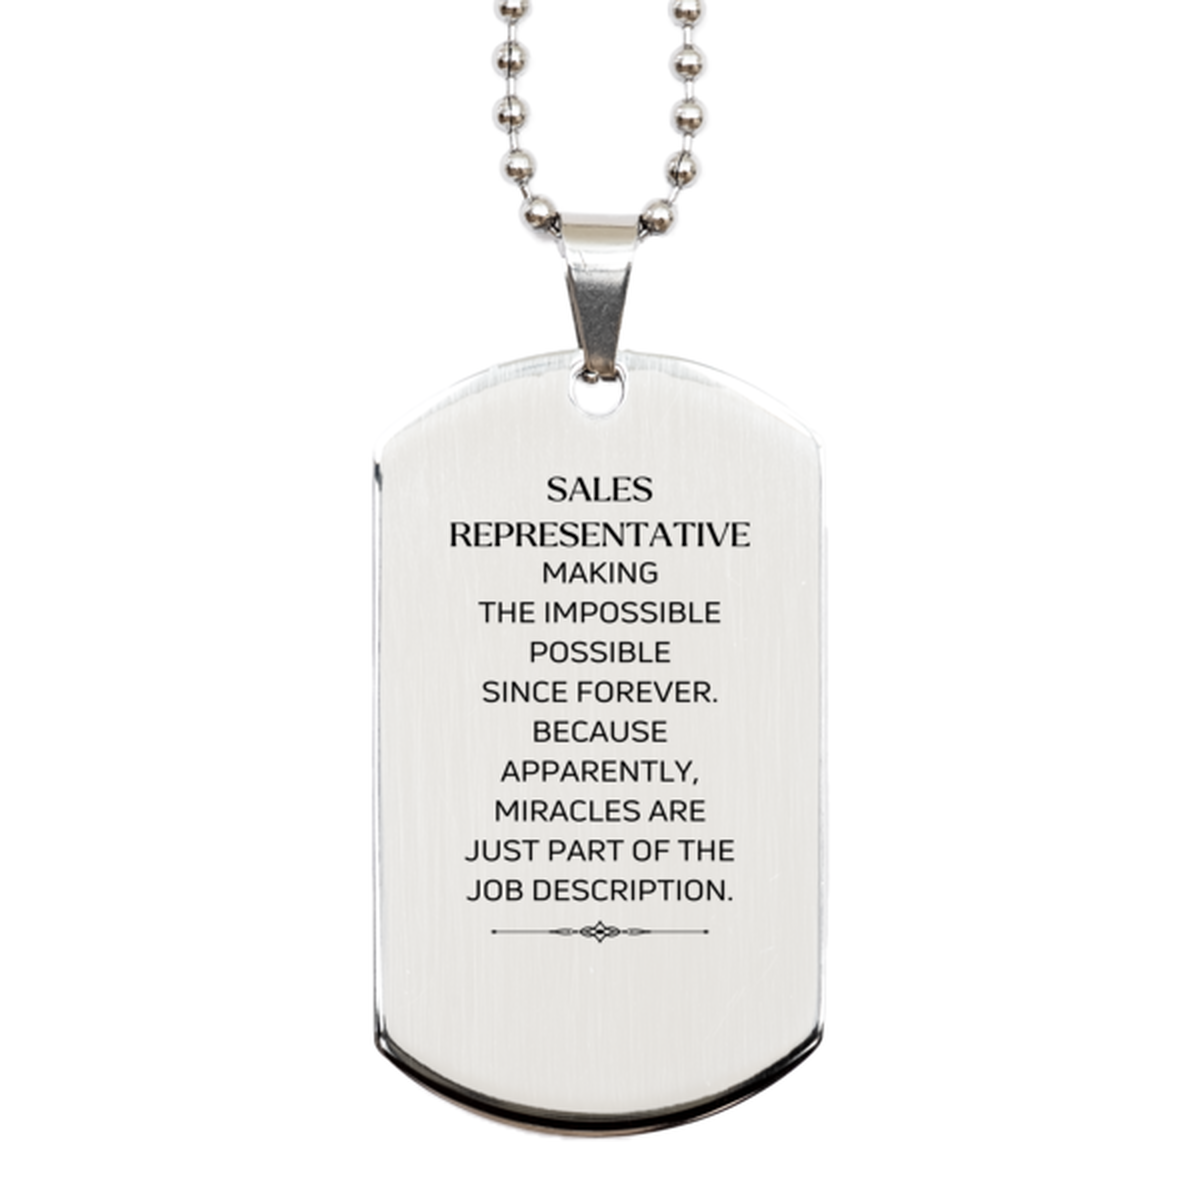 Funny Sales Representative Gifts, Miracles are just part of the job description, Inspirational Birthday Silver Dog Tag For Sales Representative, Men, Women, Coworkers, Friends, Boss